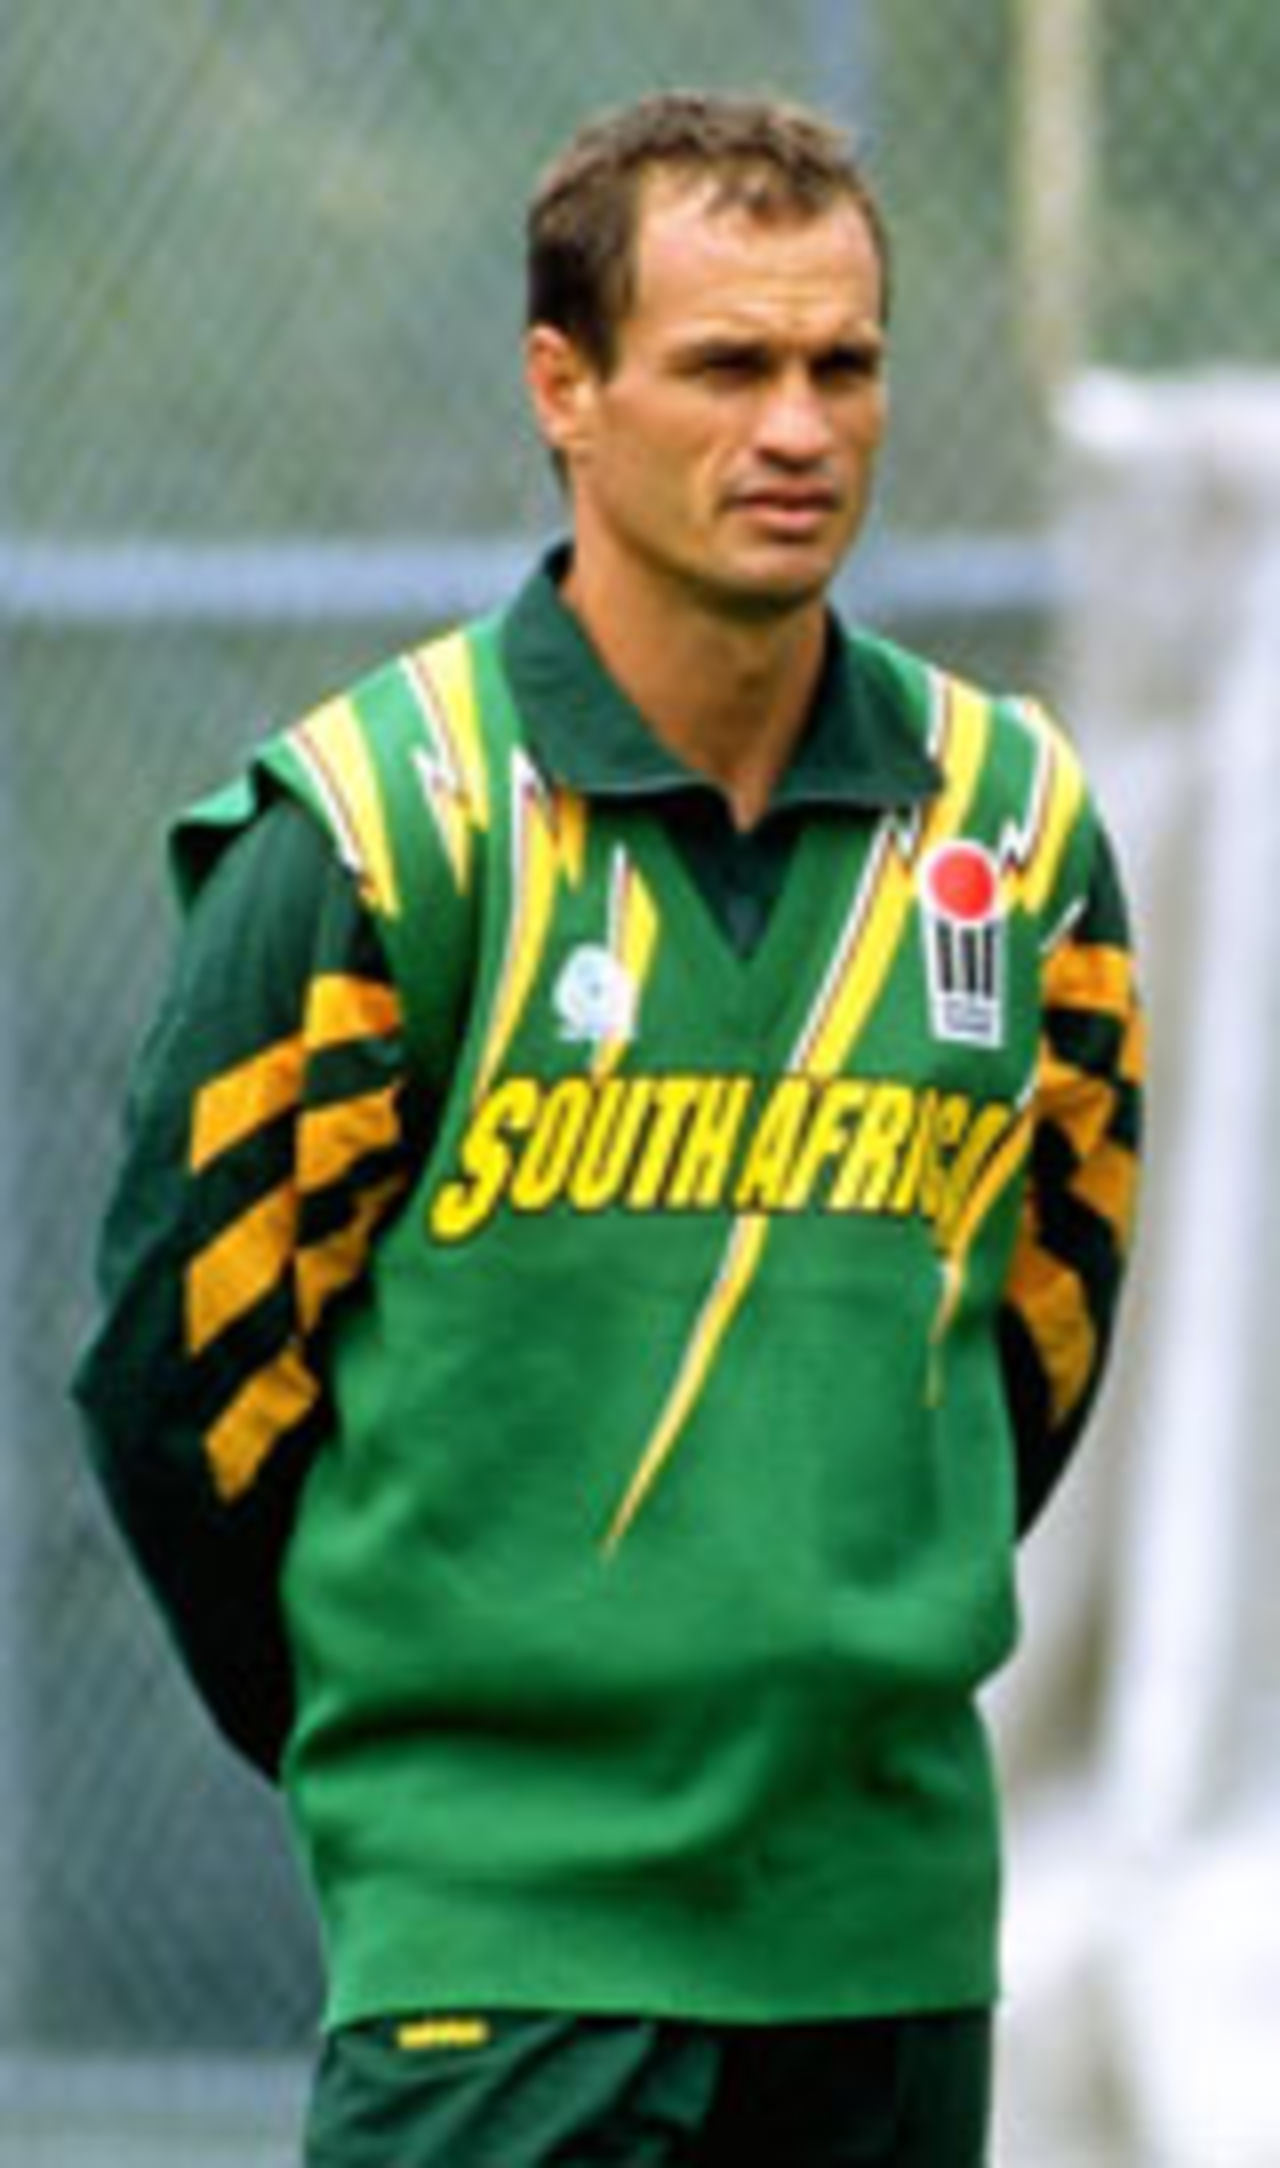 Kepler Wessels as coach of South Africa, December 1993